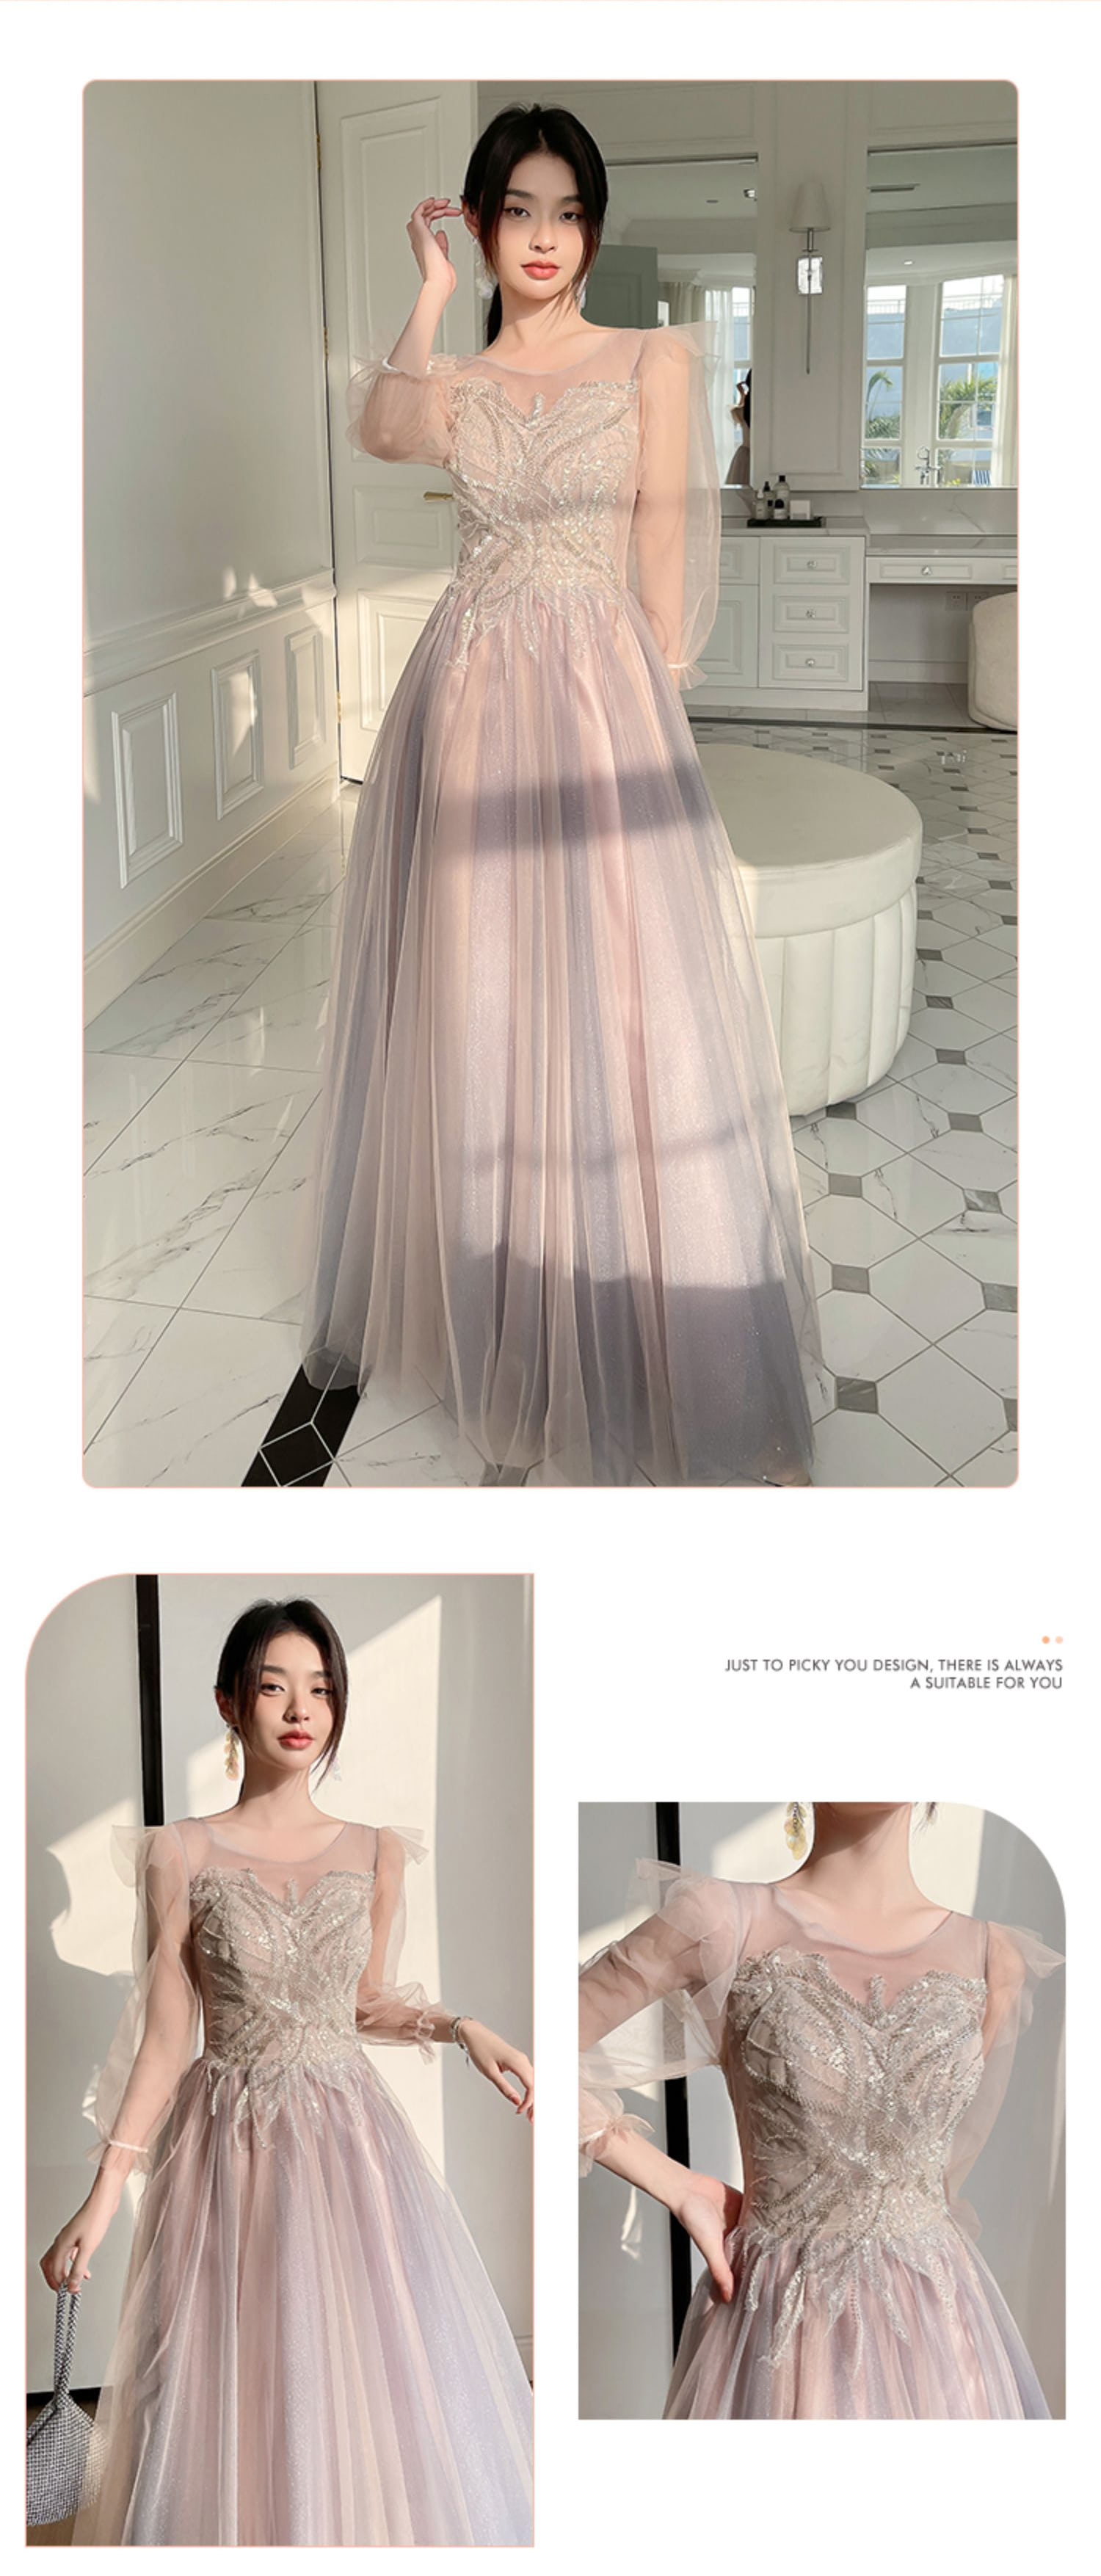 Elegant-Pale-Pink-Maxi-Bridesmaid-Dress-Long-Party-Ball-Gown18